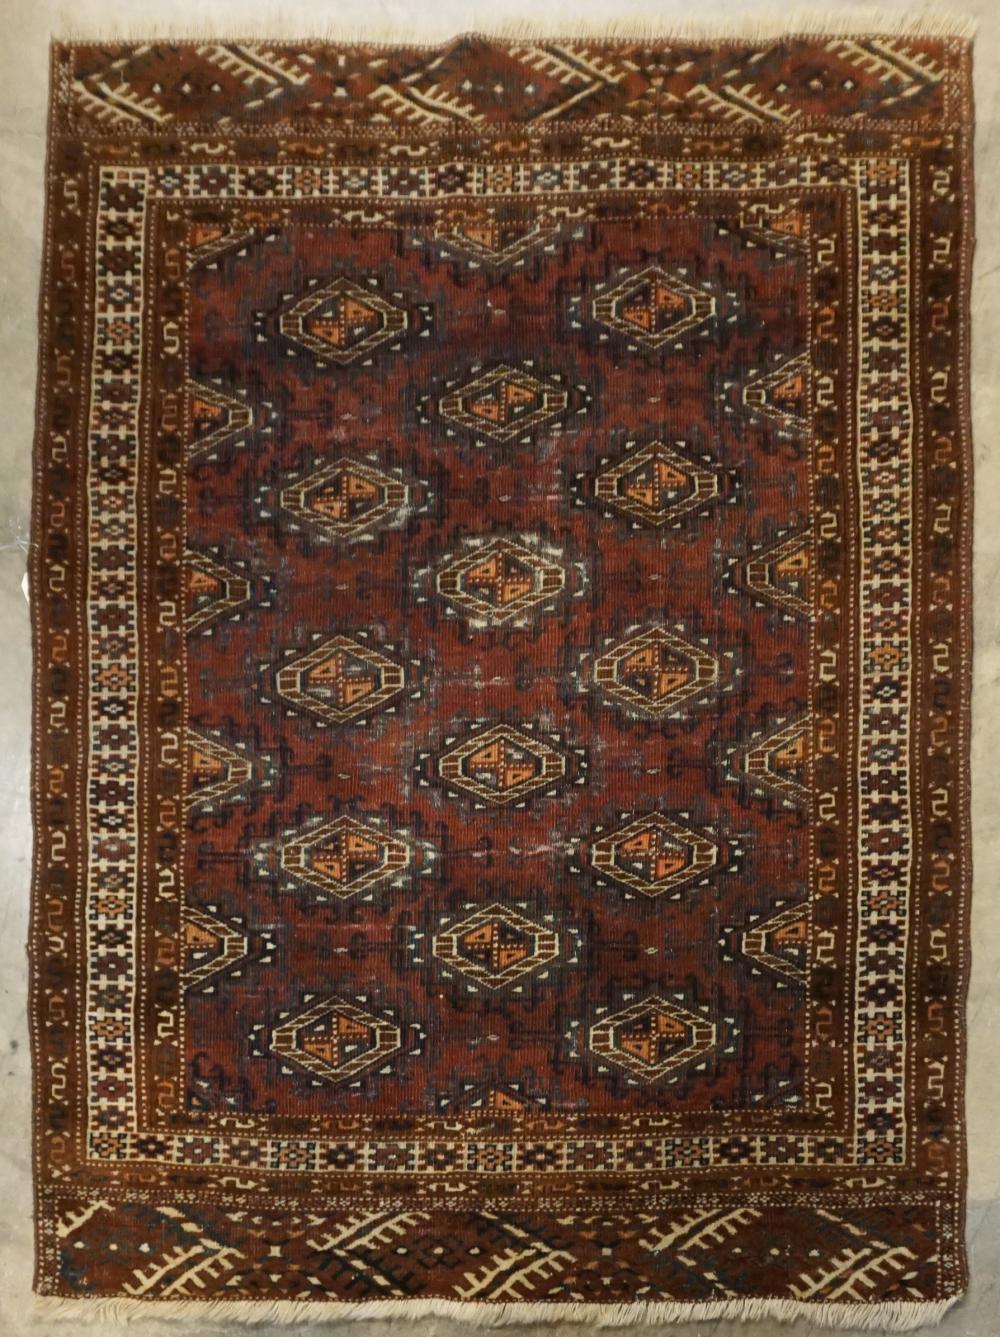 TURKOMAN RUG, 4 FT 3 IN X 3 FT